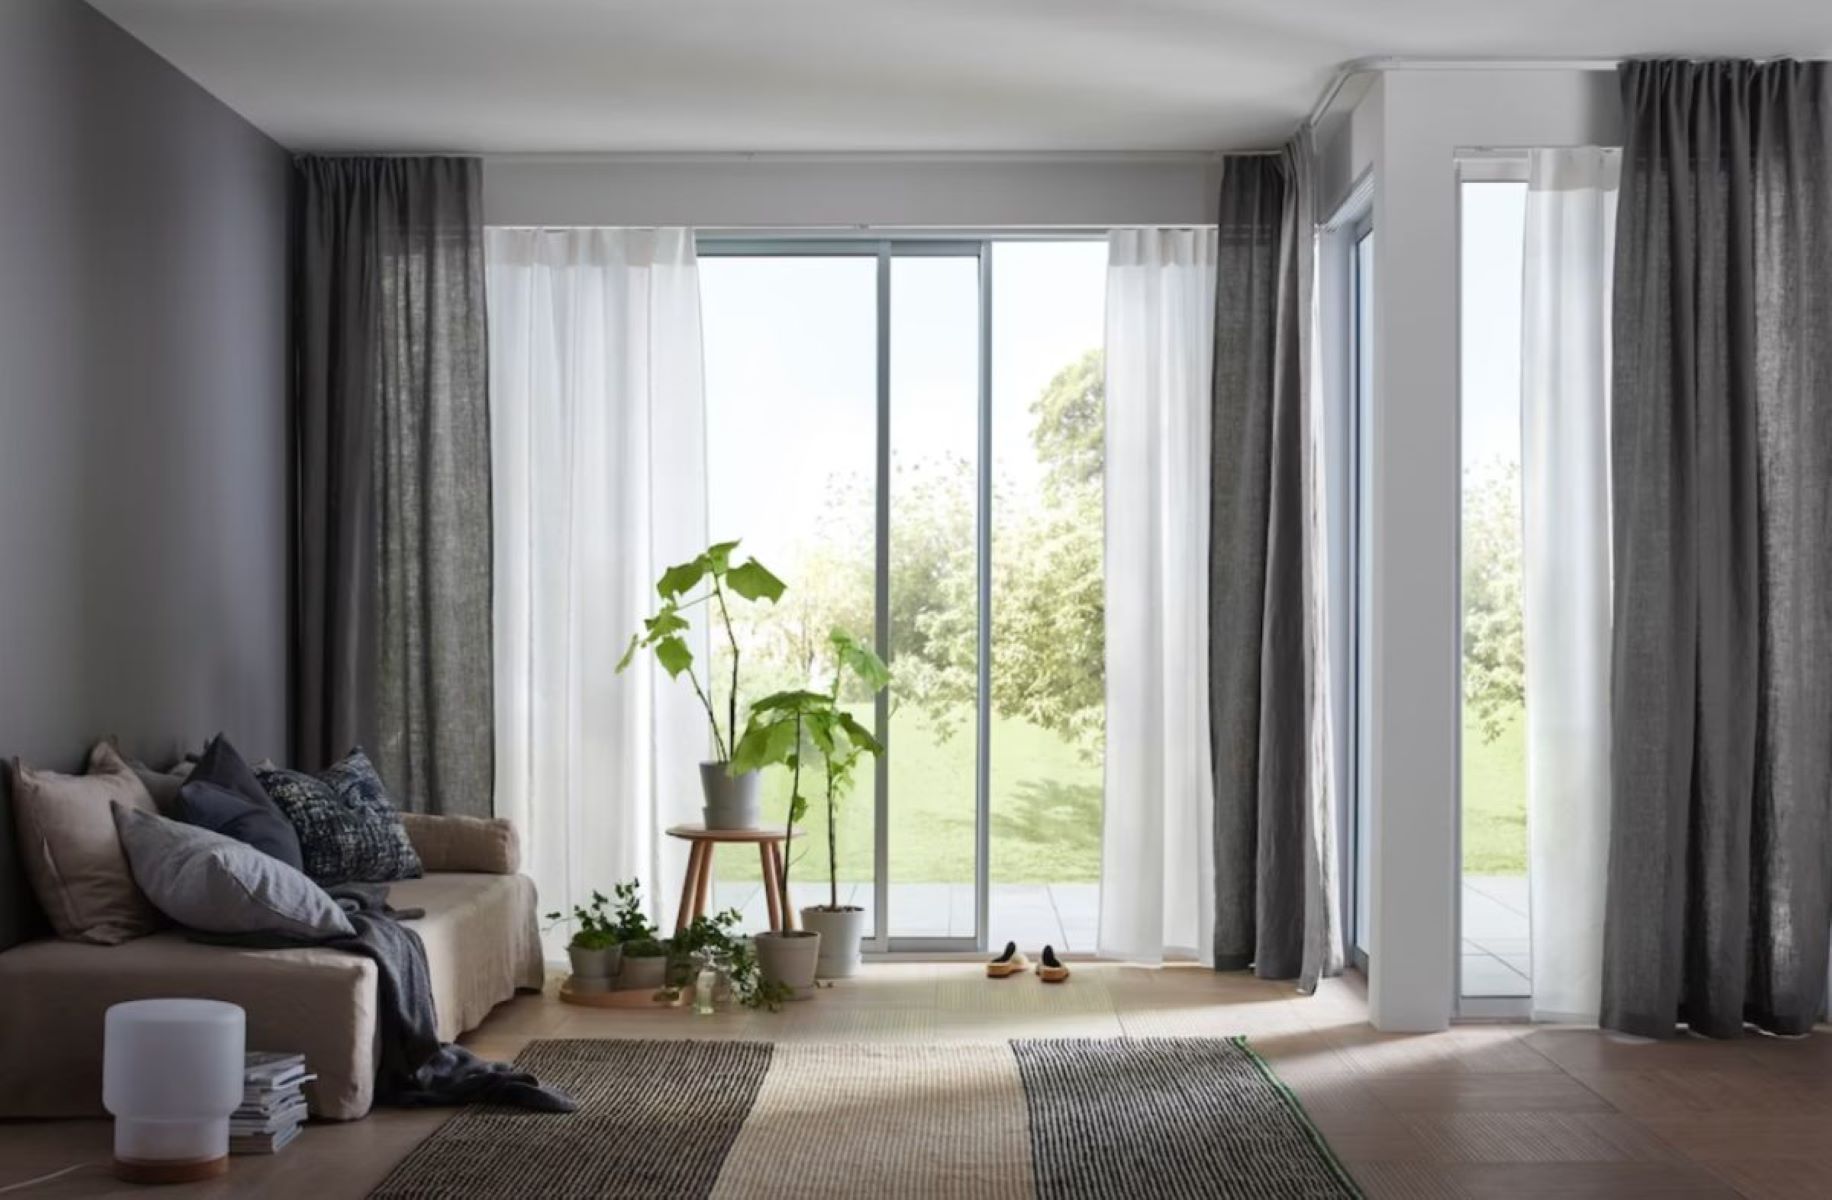 How To Hang Curtains On A Sliding Glass Door